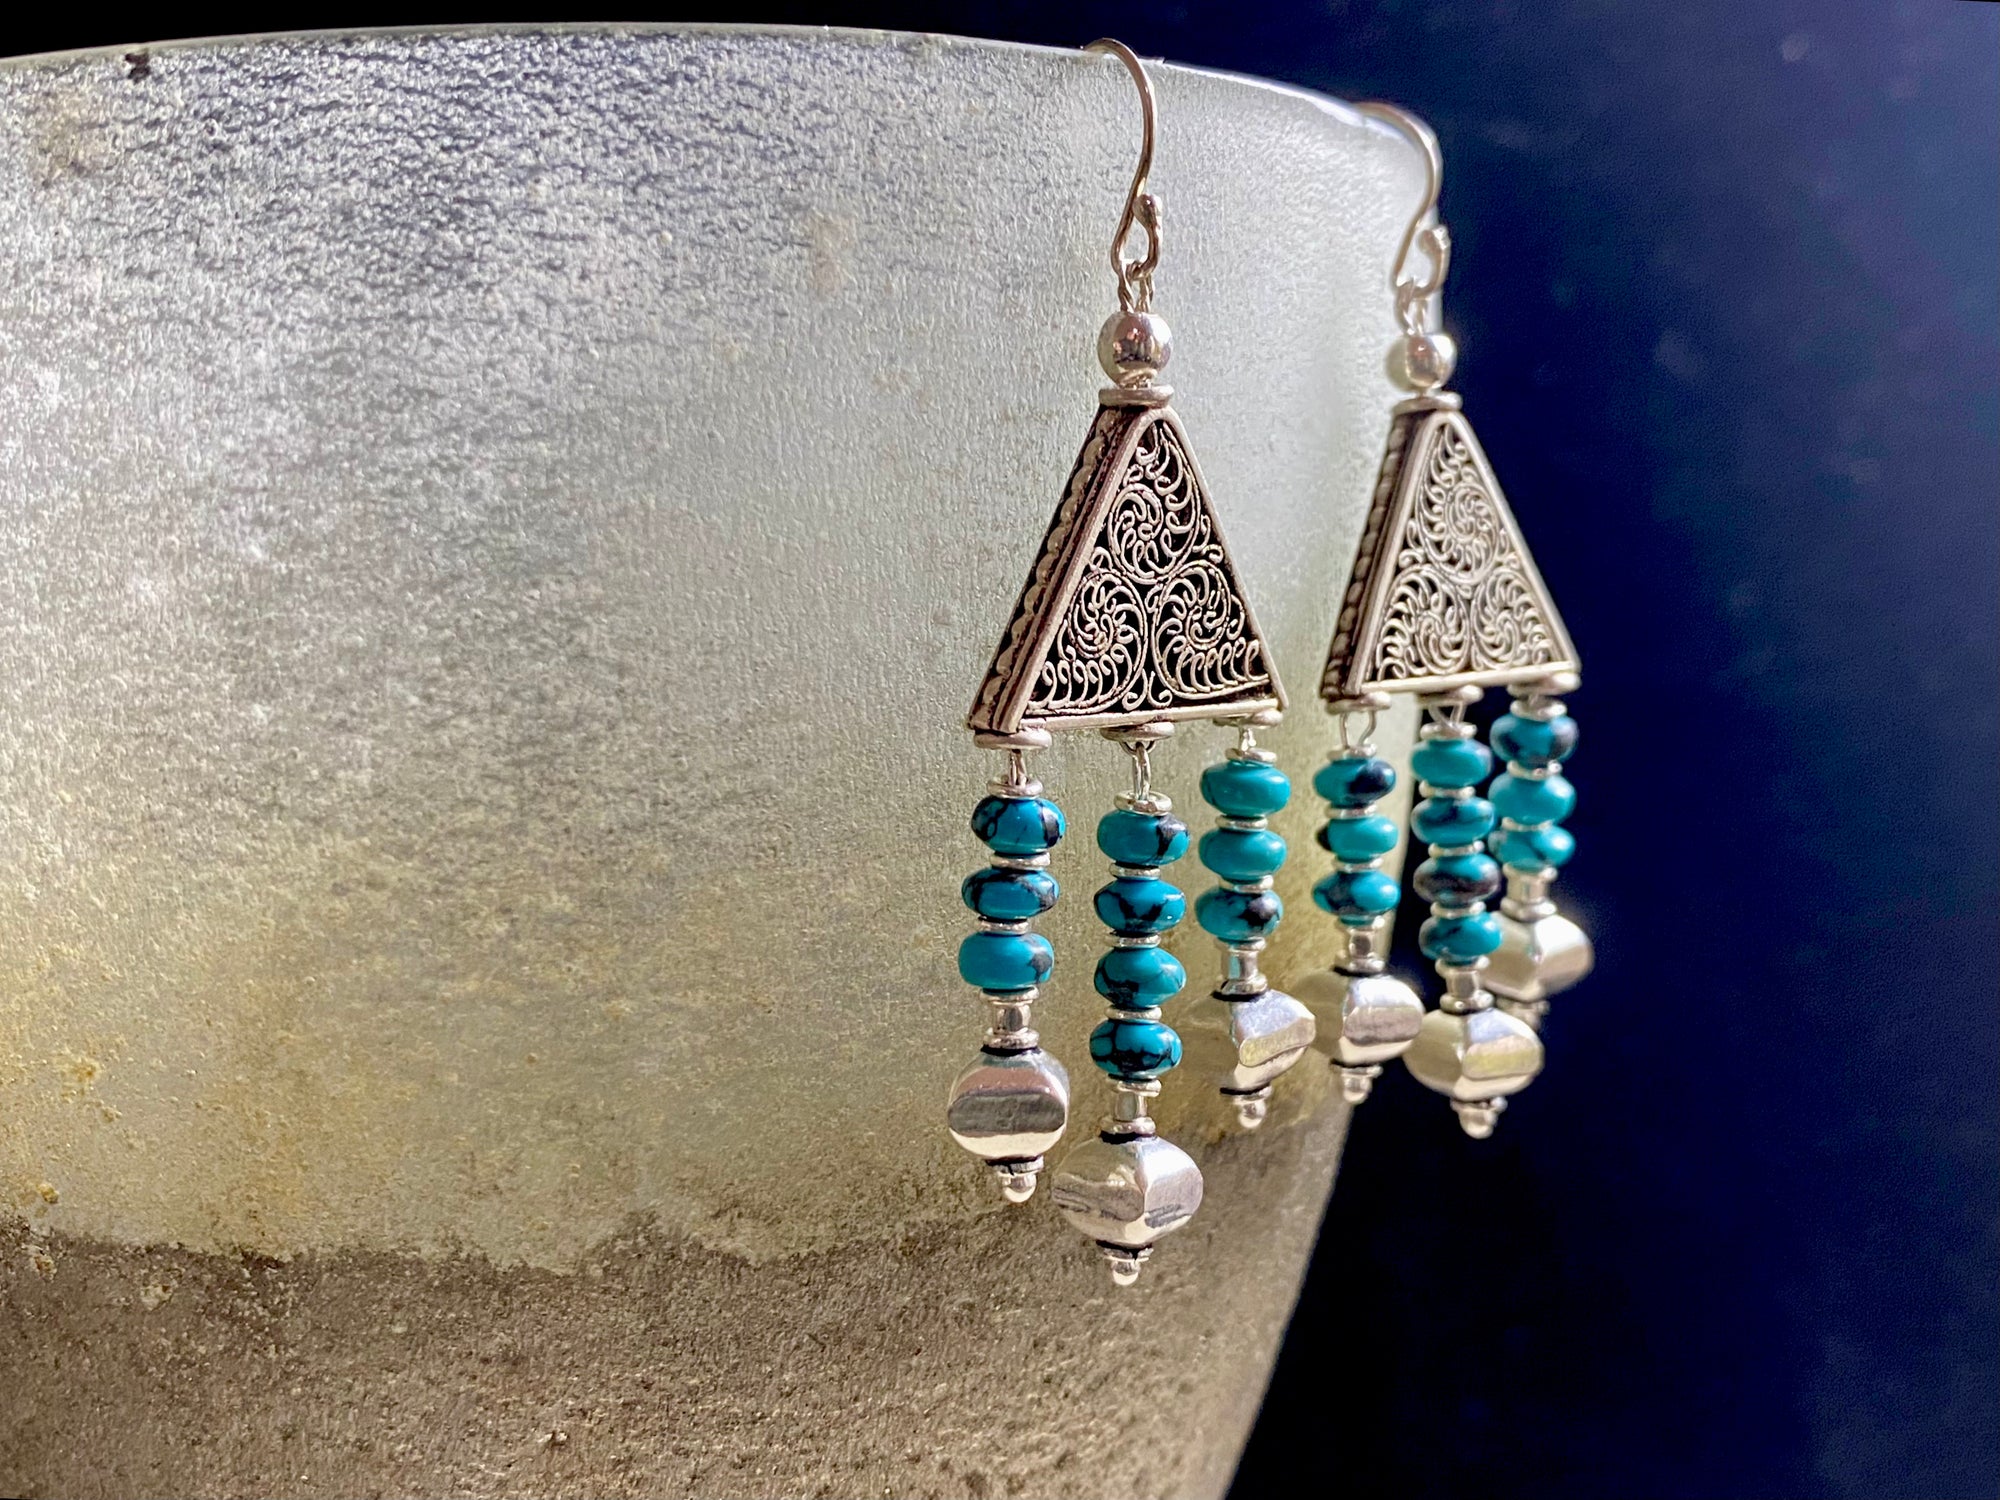 Stylish 3 strand chandelier earrings made from turquoise and sterling silver handmade chandelier pieces, detailing and hooks. Stunning, with an ancient Roman look and feel. Measurements: Length approximately 6.8 cm with hook